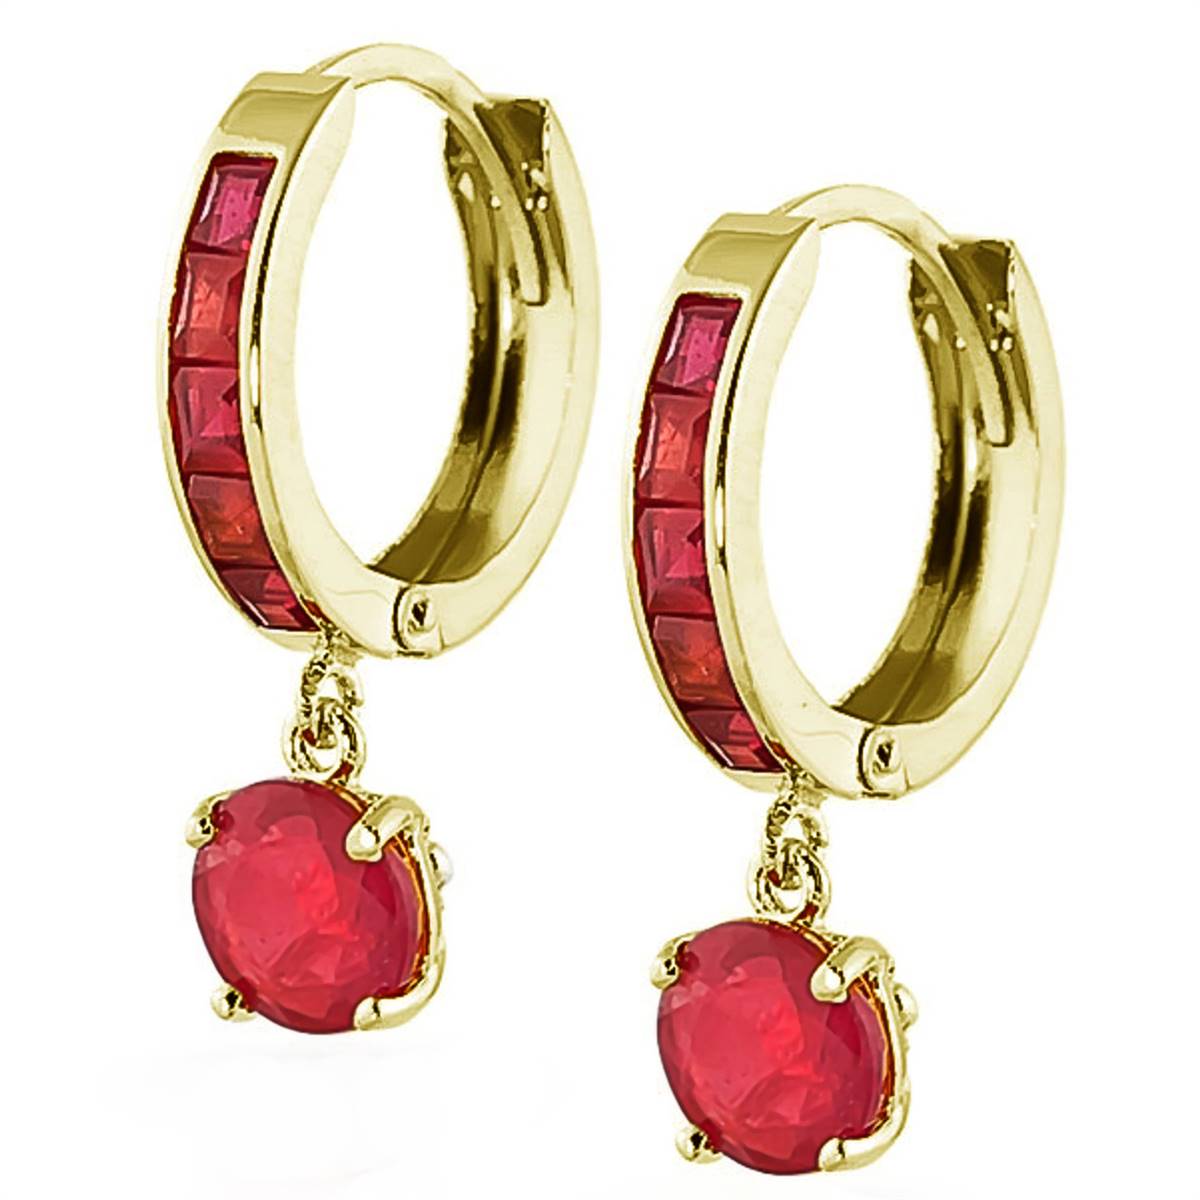 3.3 Carat 14K Solid Yellow Gold Huggie Earrings Natural Ruby